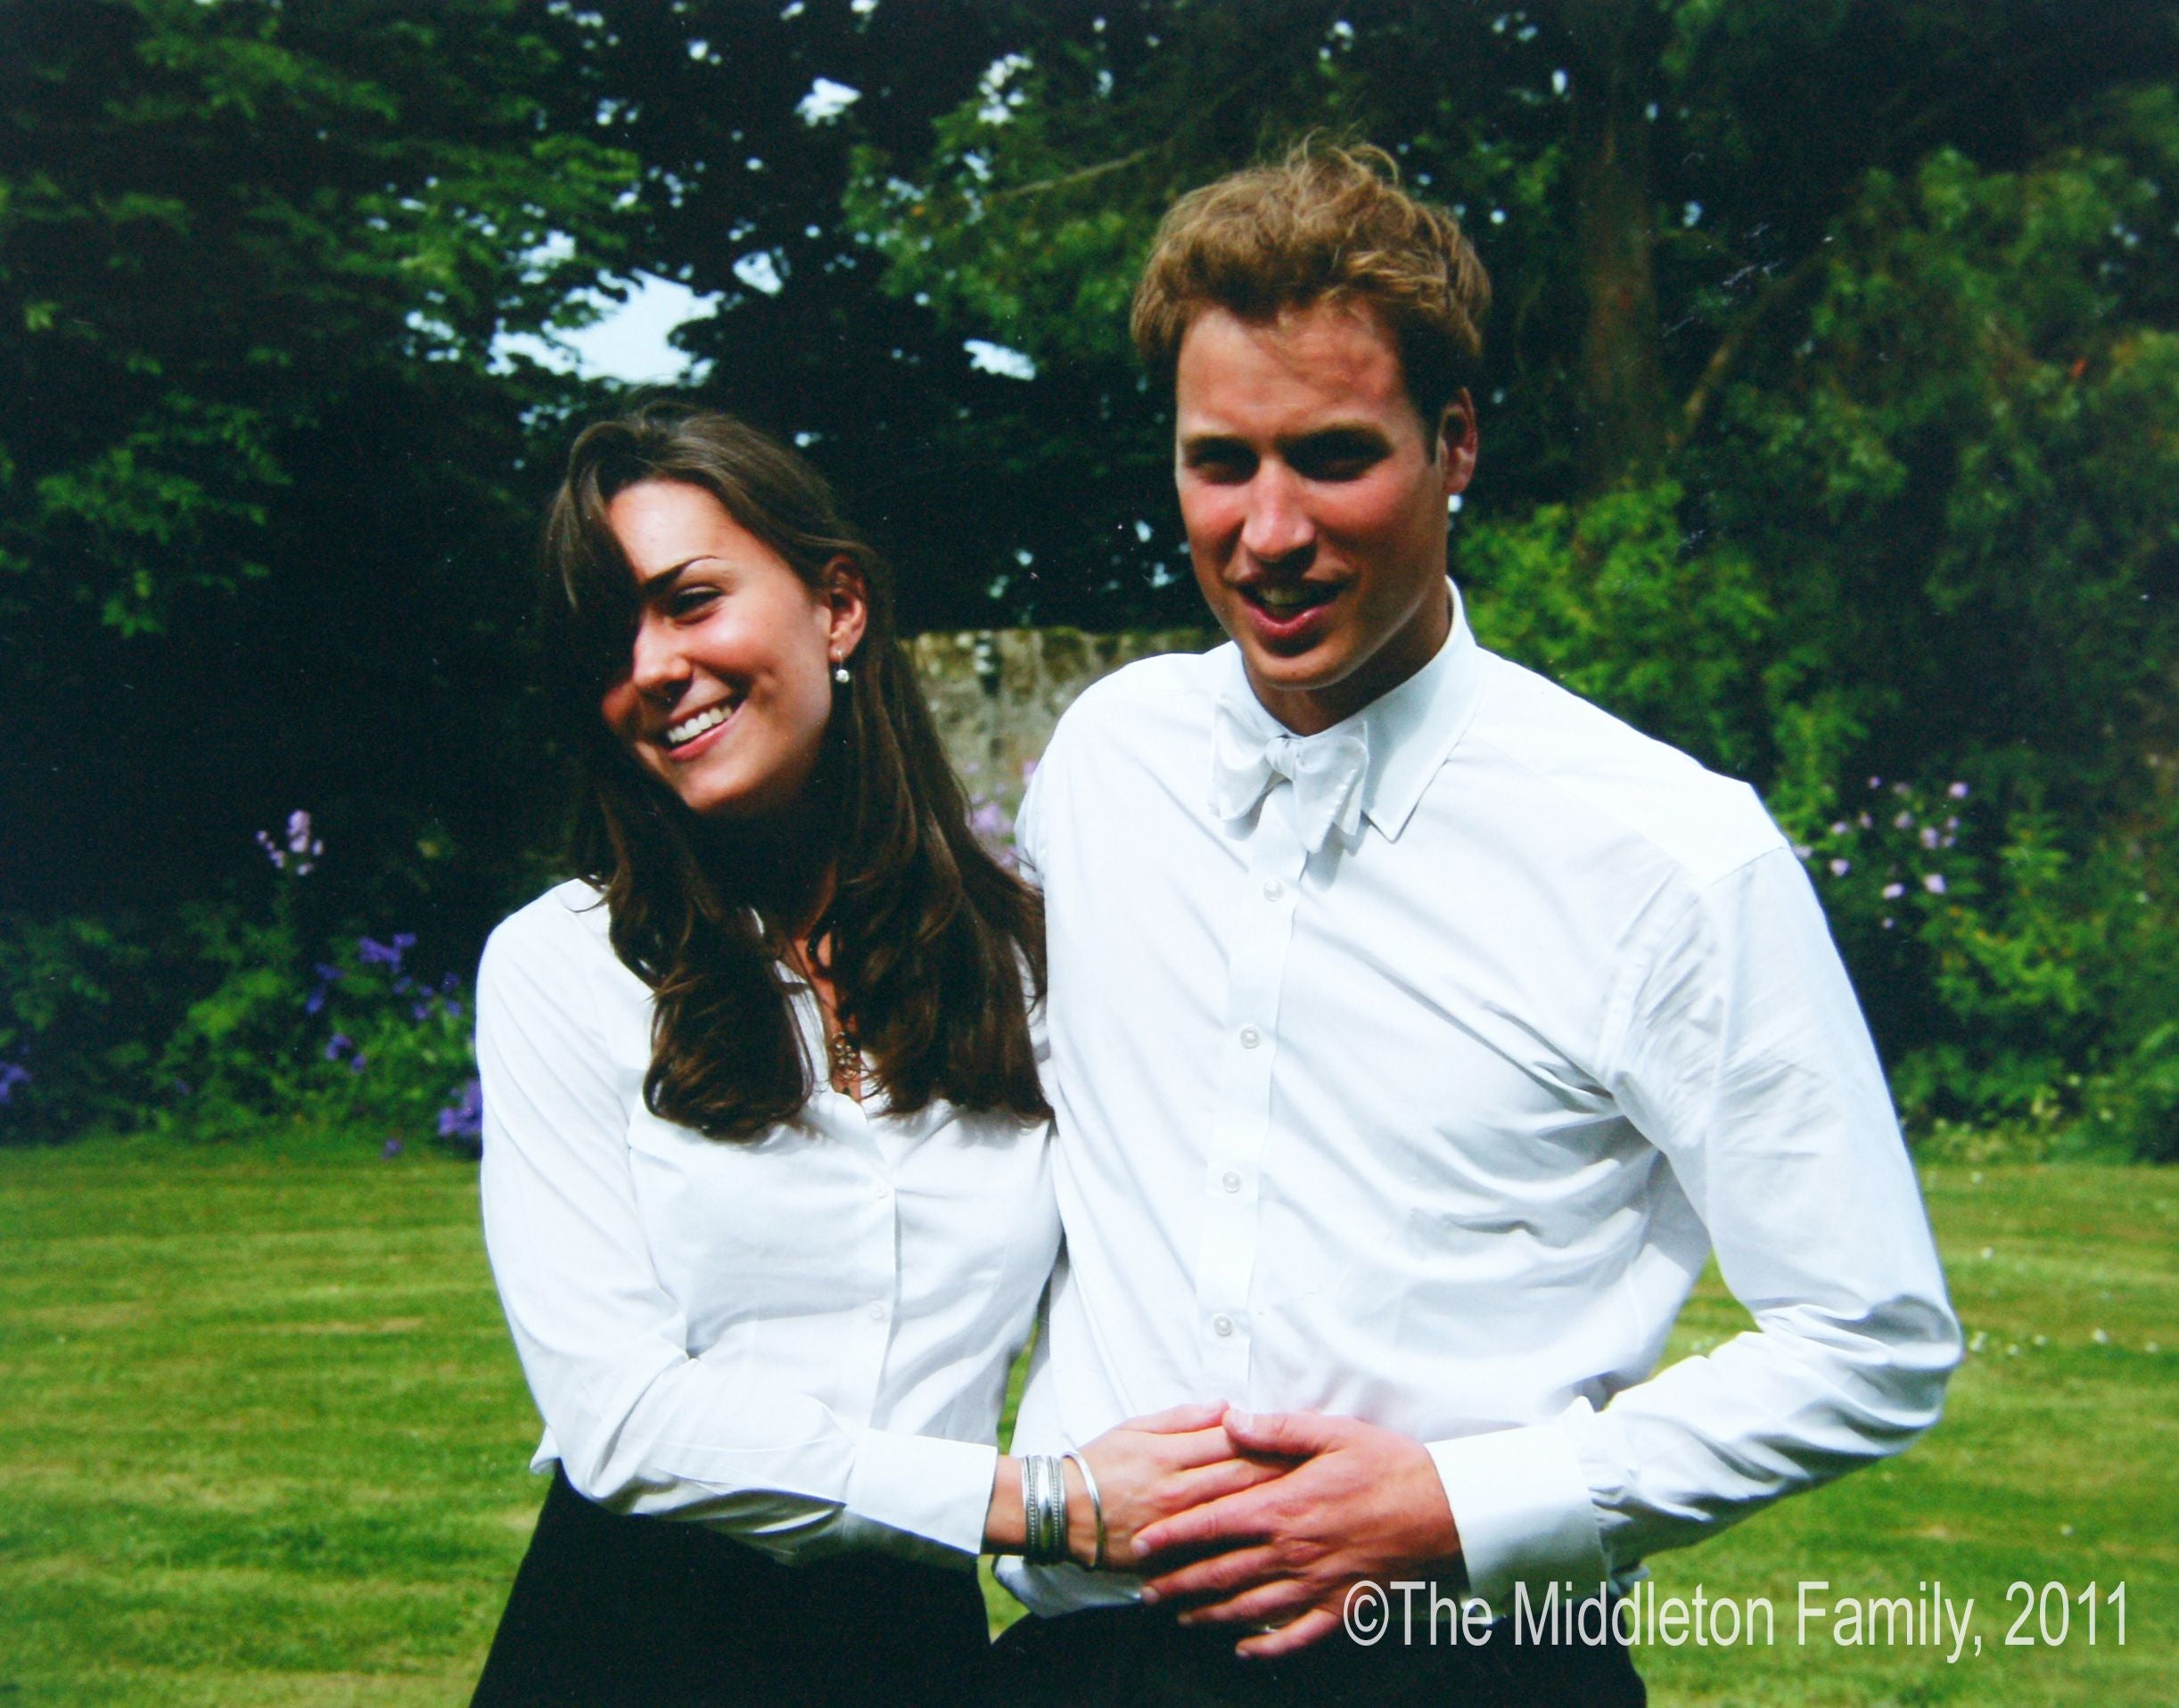 Kate and William at their University of St Andrews graduation